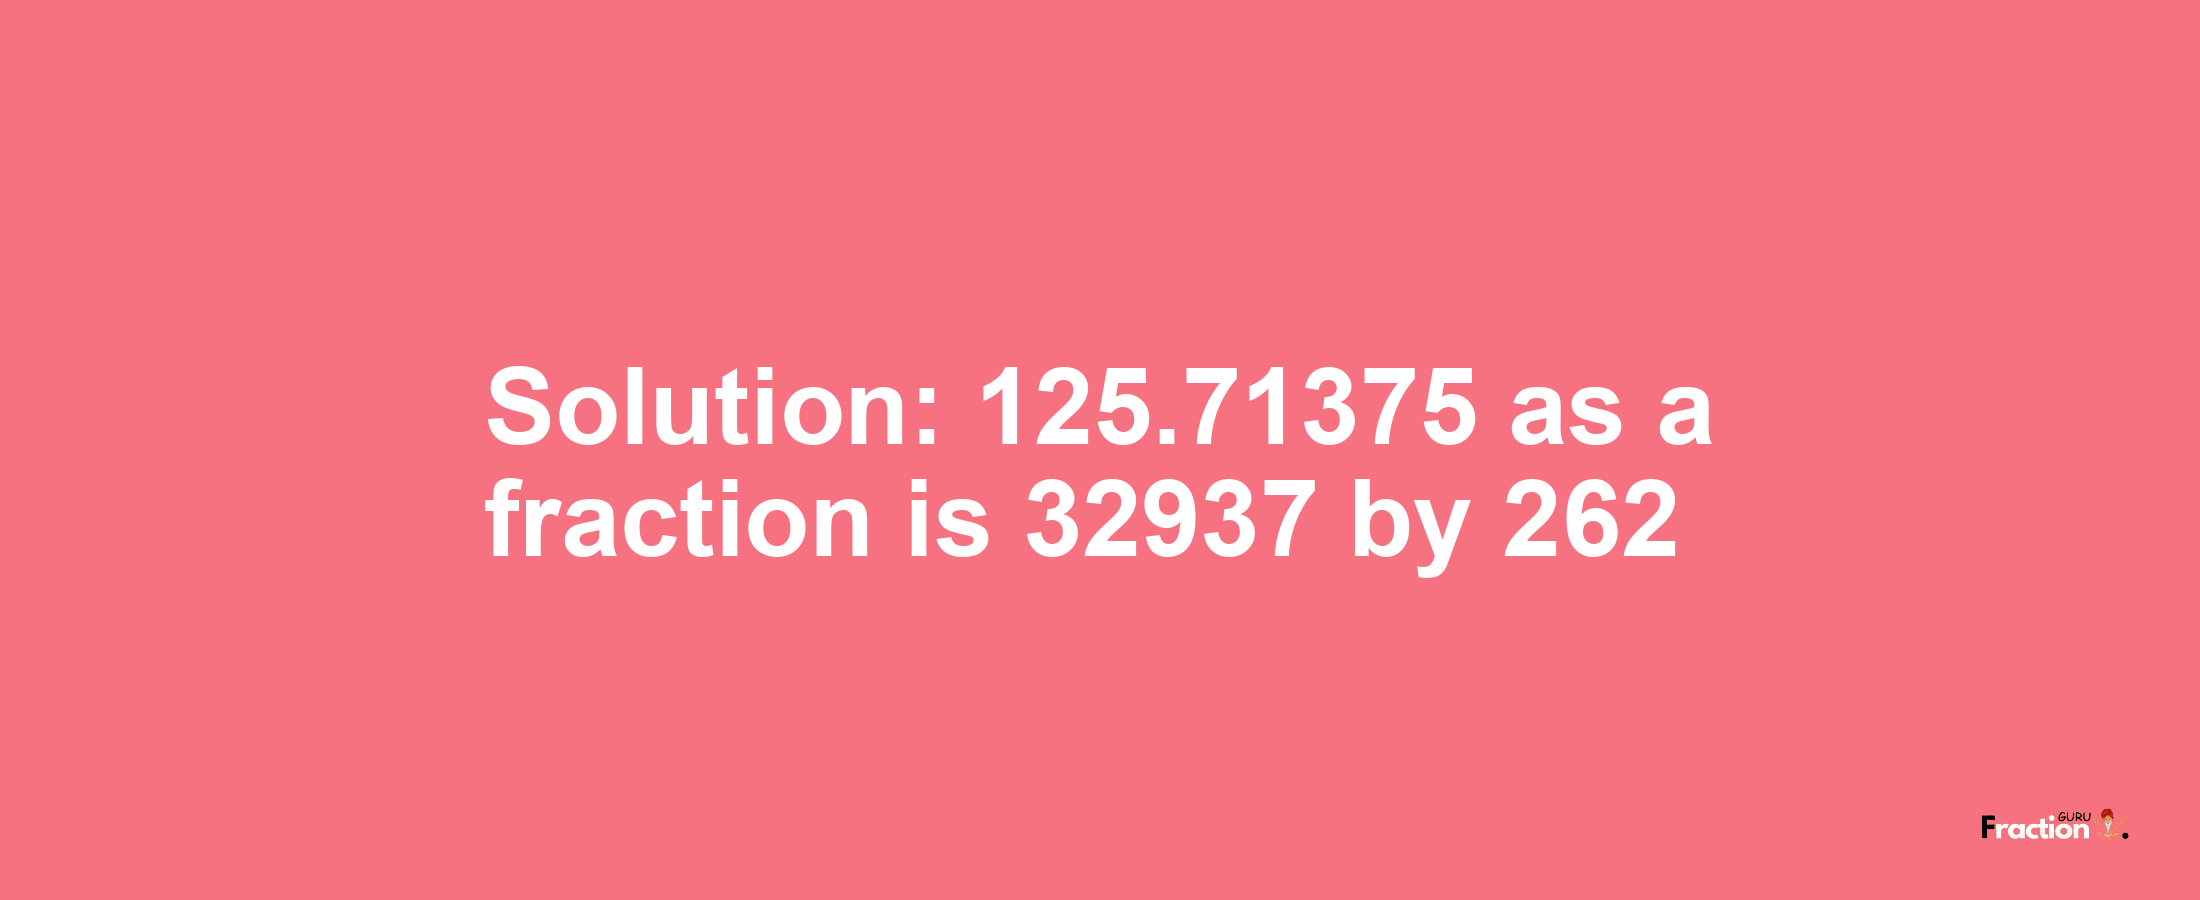 Solution:125.71375 as a fraction is 32937/262